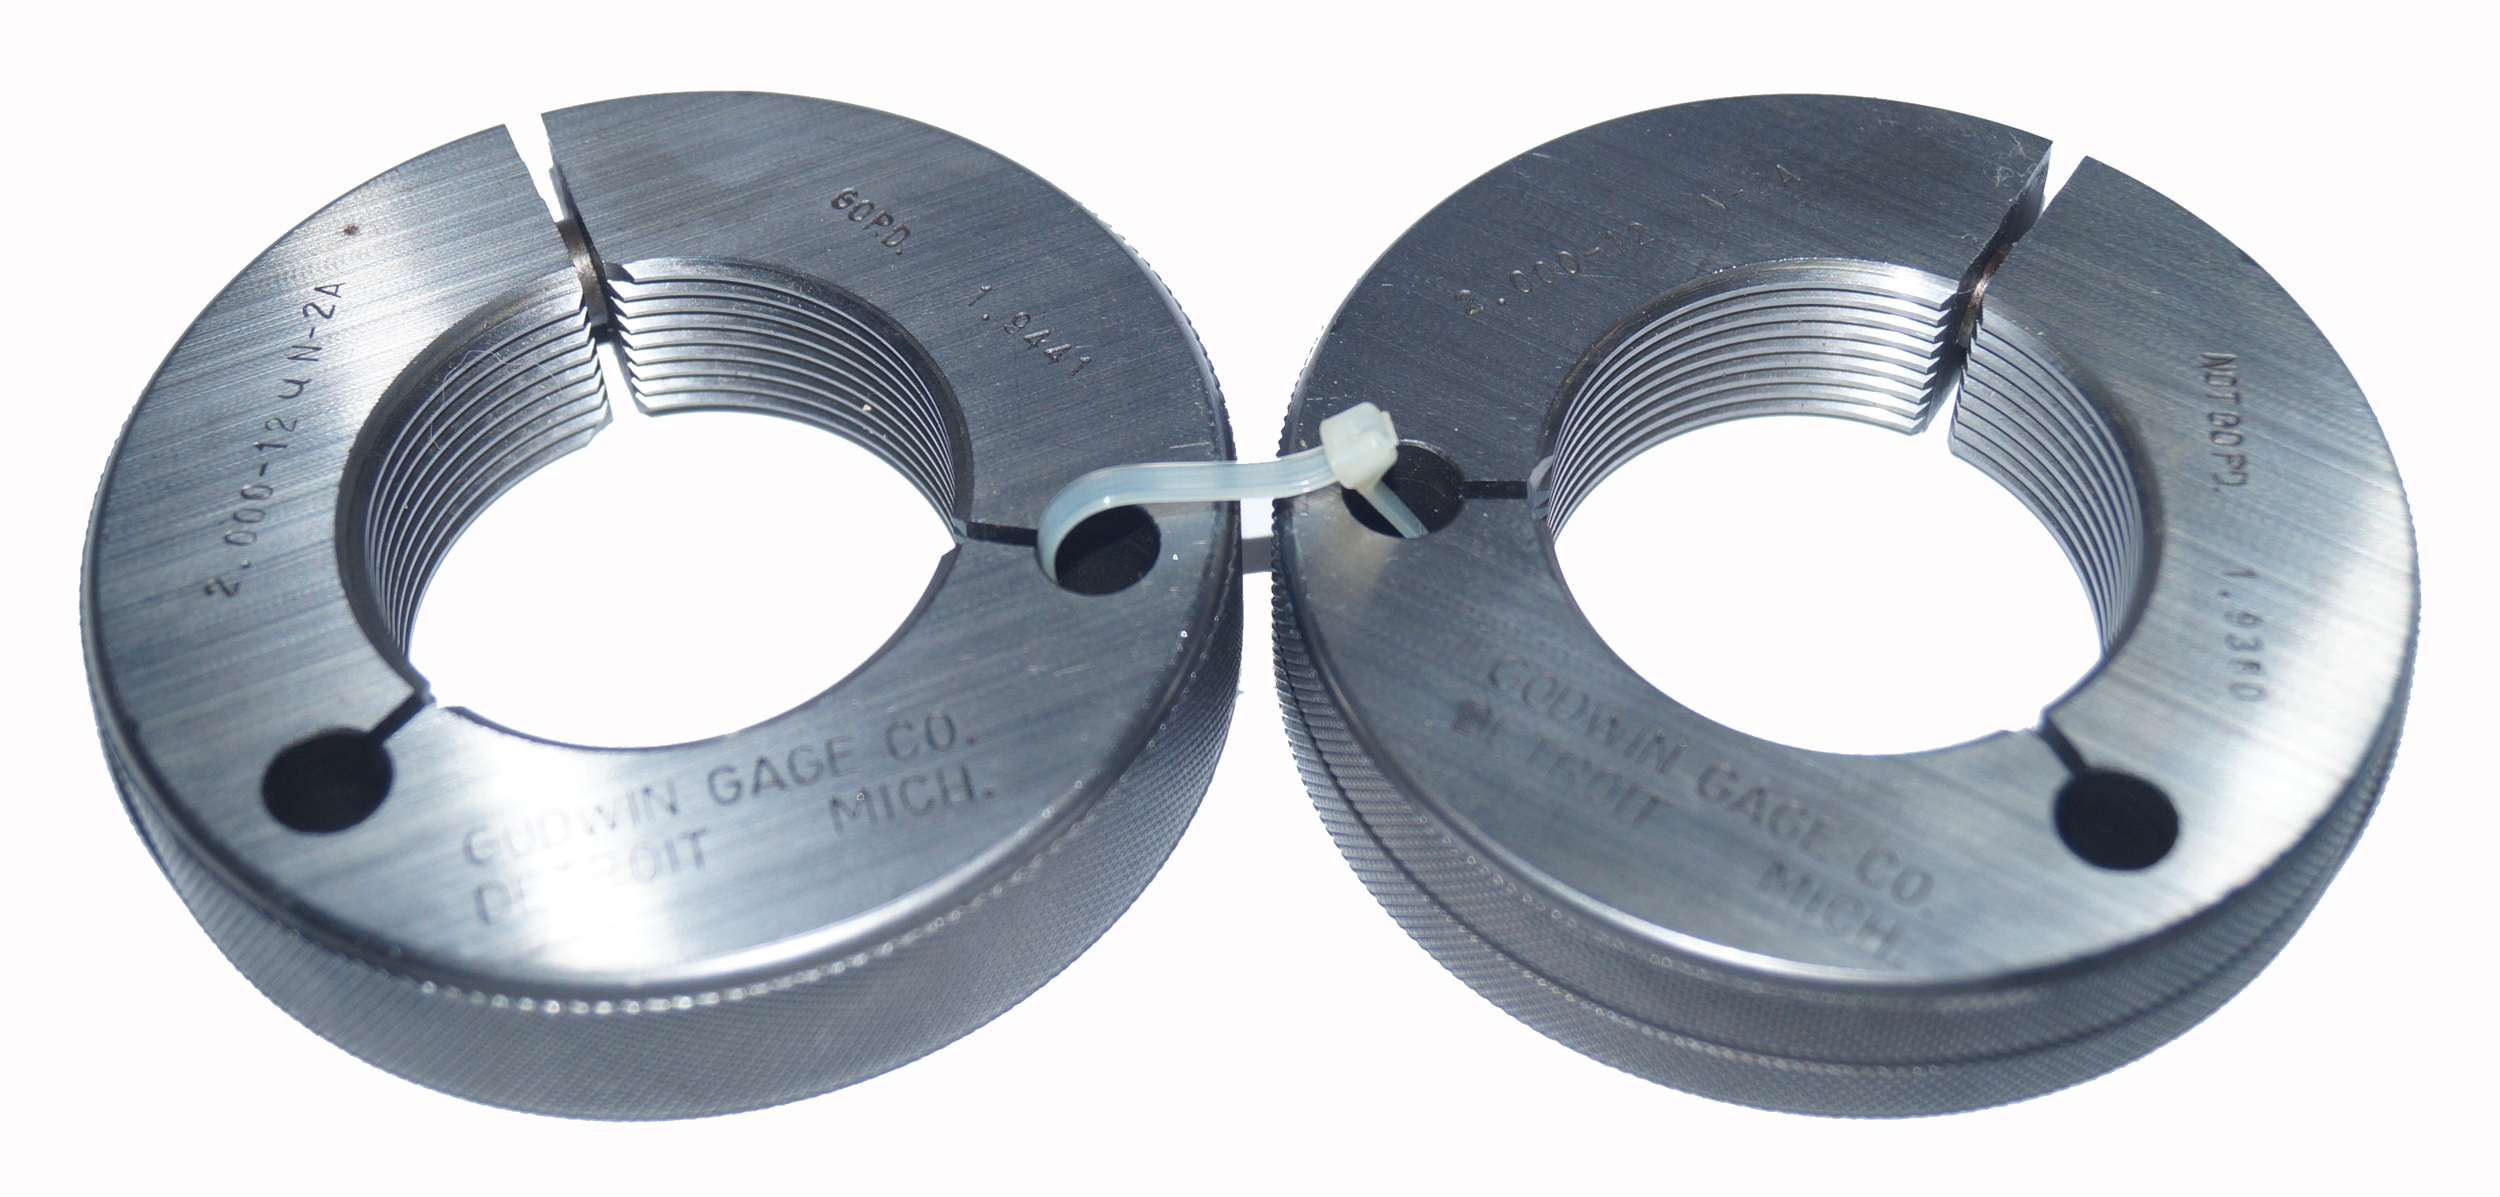 2-12 UN Thread Ring Gage 2A GO NOGO 100% Calibrated Ship by FedEx Delivery in 4 Days